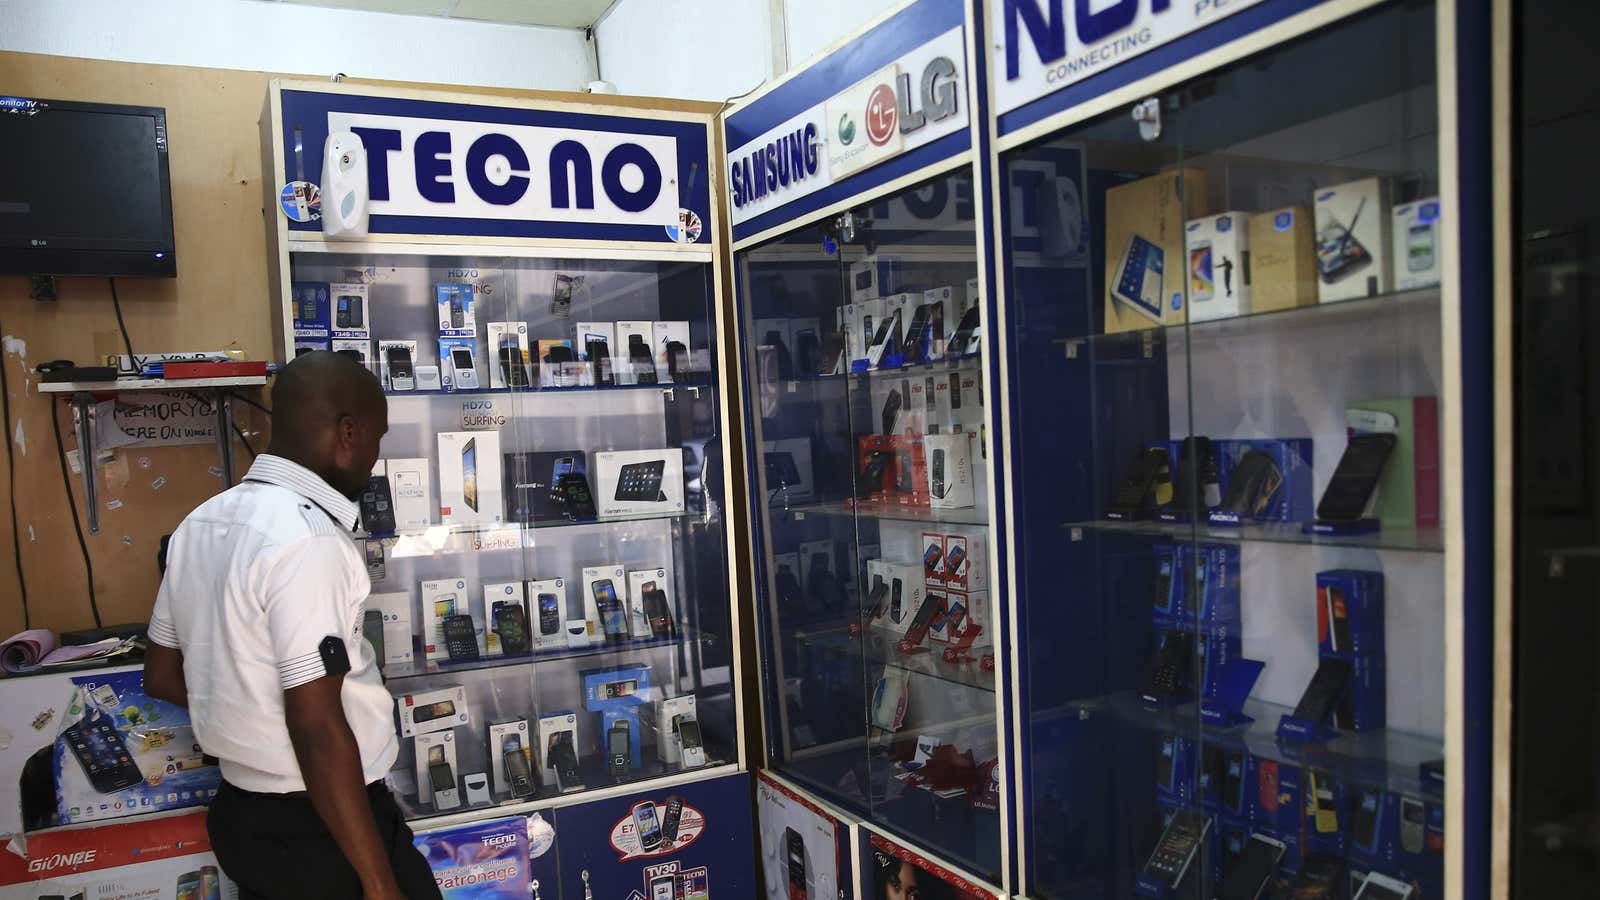 Transsion’s Tecno brand in competition with Samsung in Abuja, Nigeria.